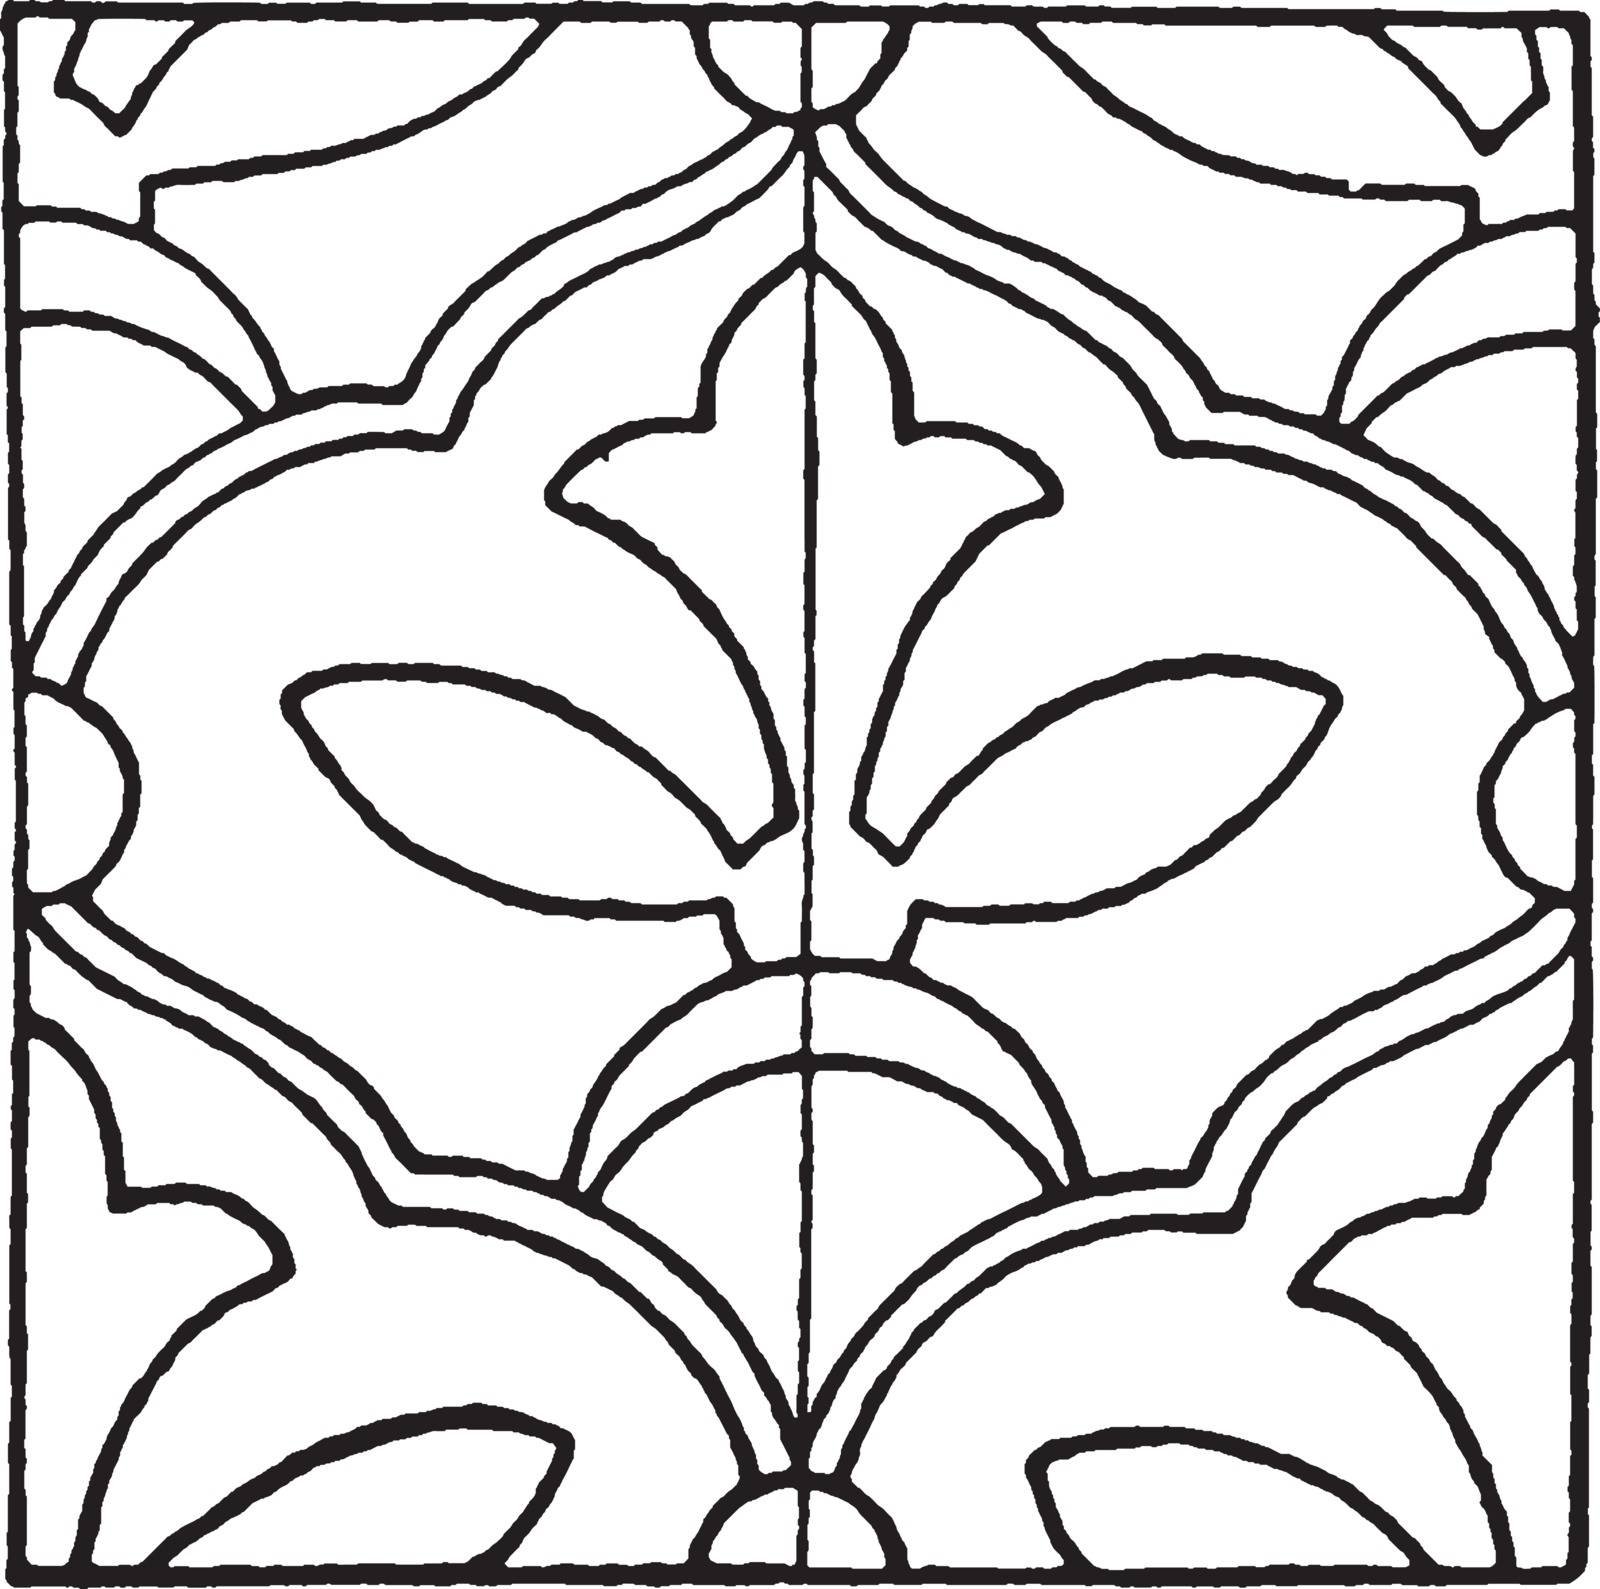 Persian Enamel Pattern is a Glass Fusing Decal, vintage line drawing or engraving illustration.